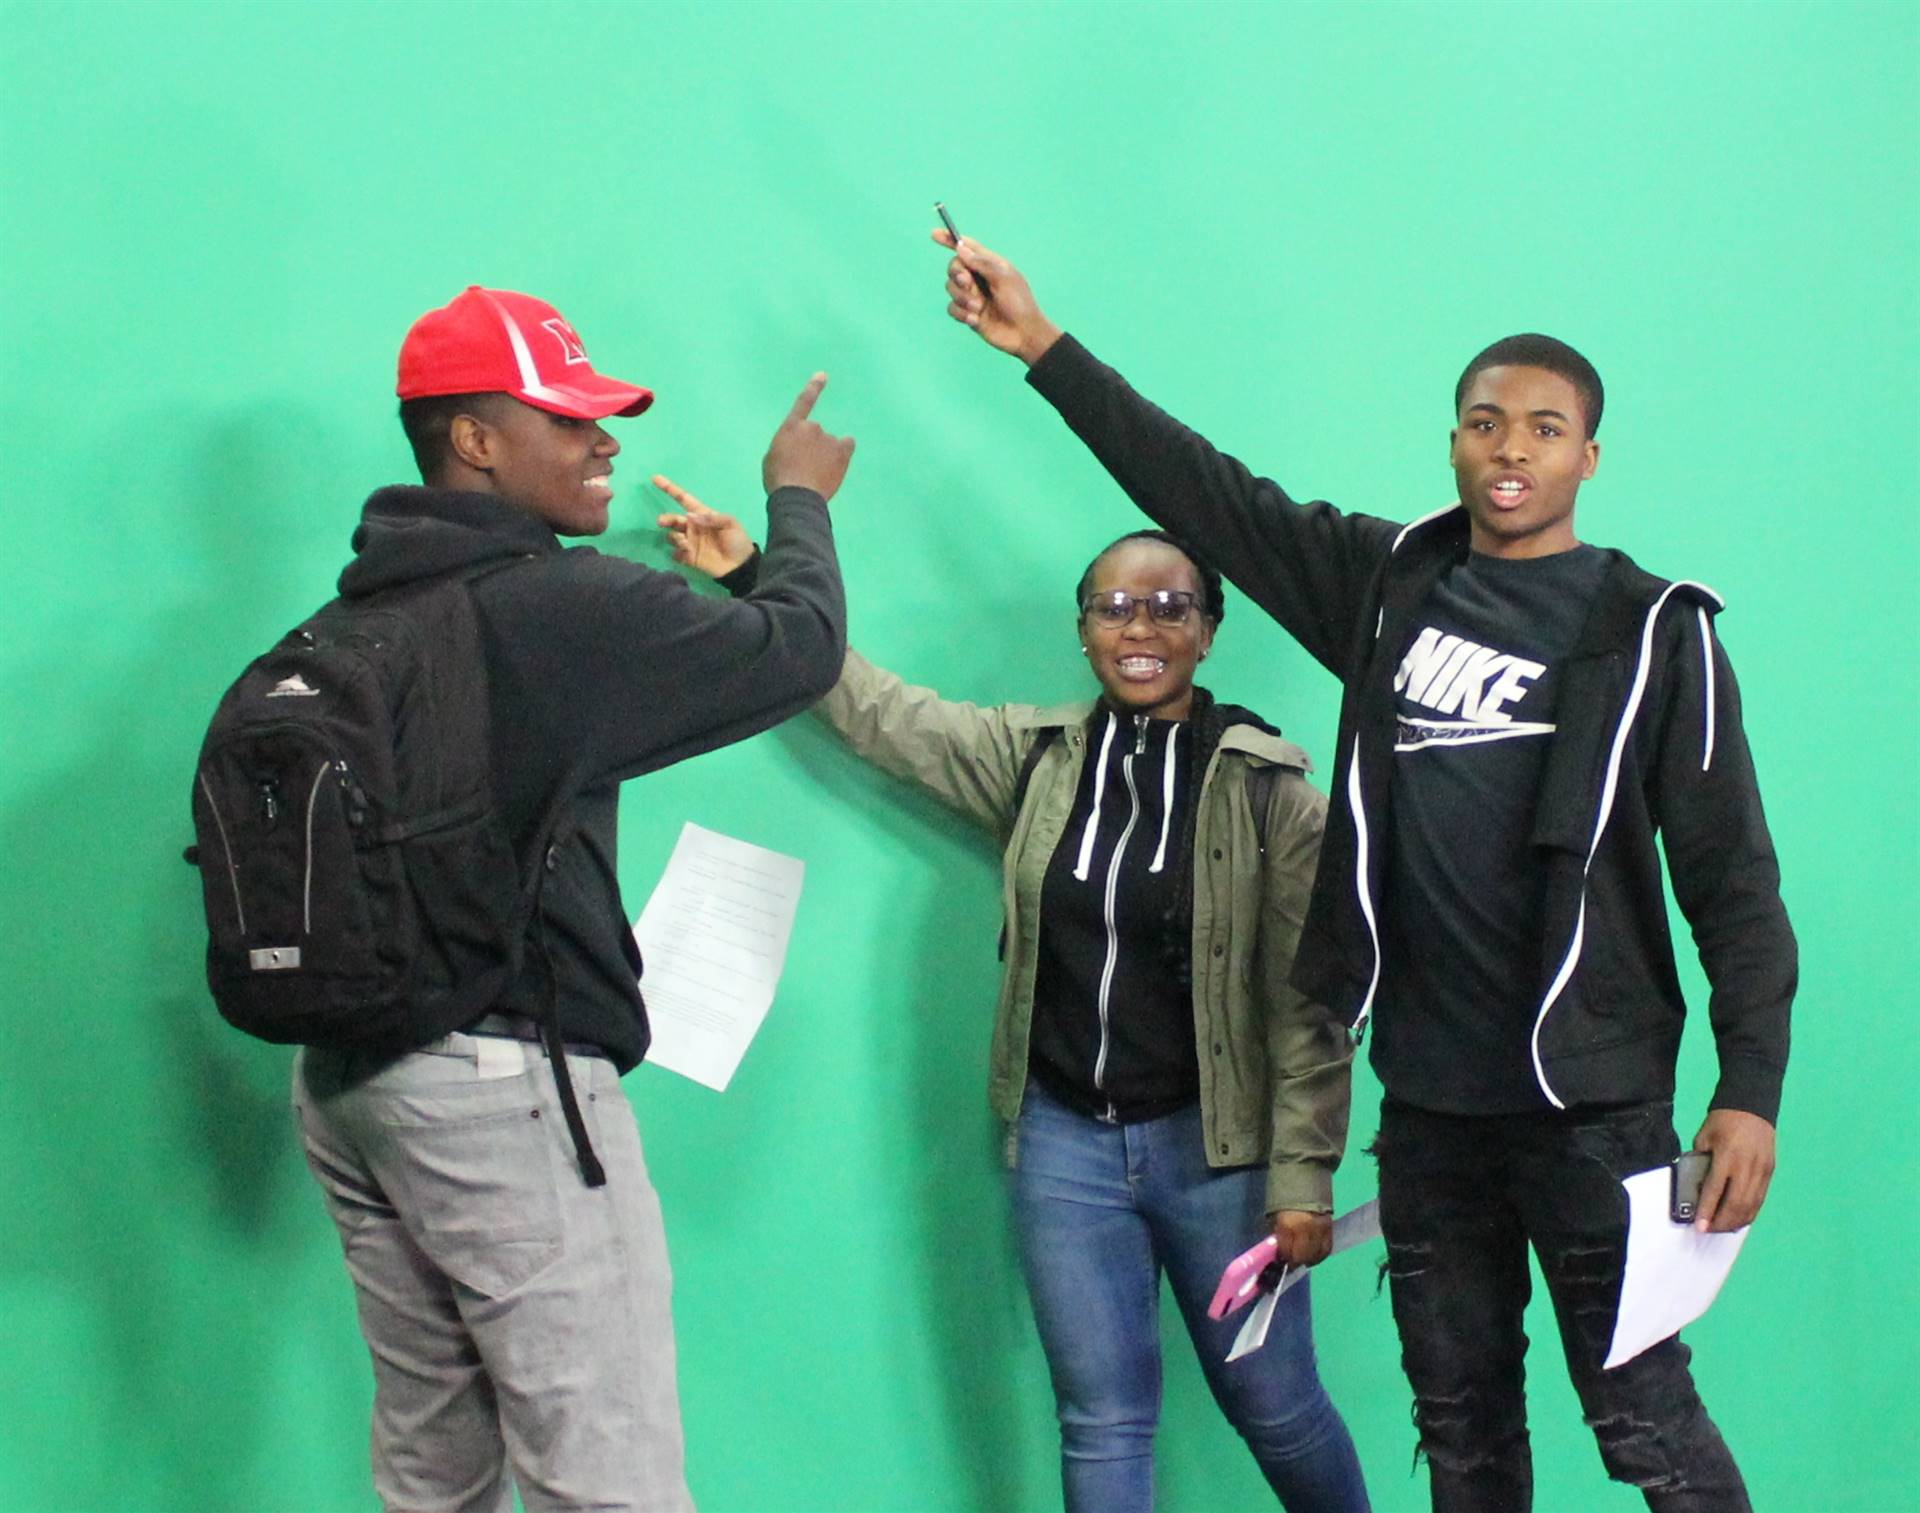 Students practice using the green screen.